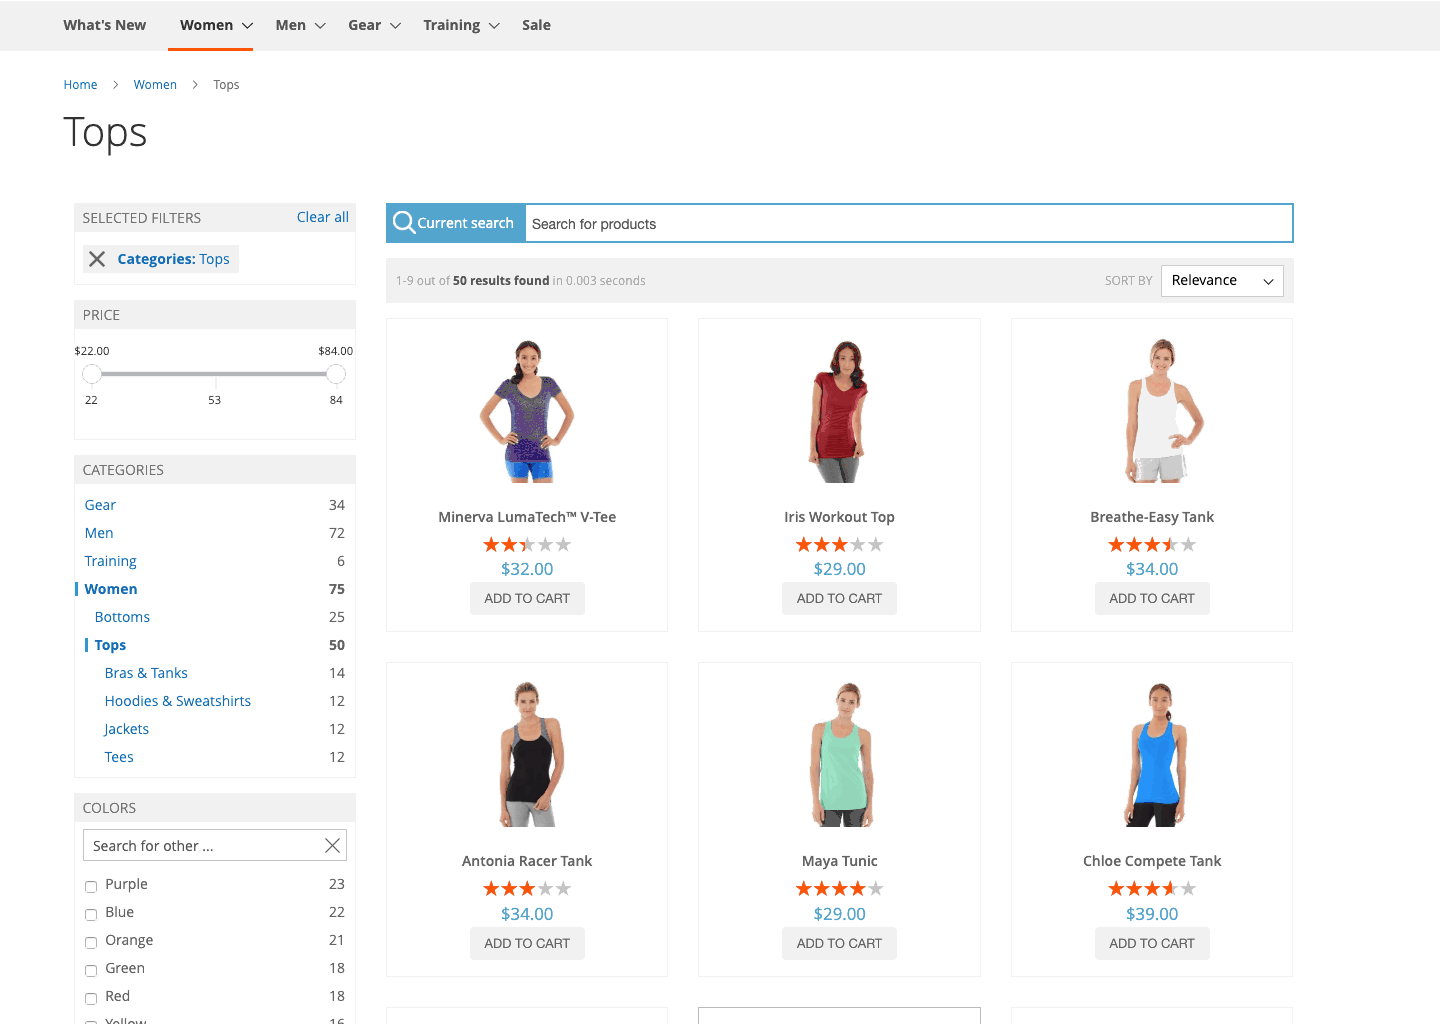 Adobe Commerce (Magento) search navigation